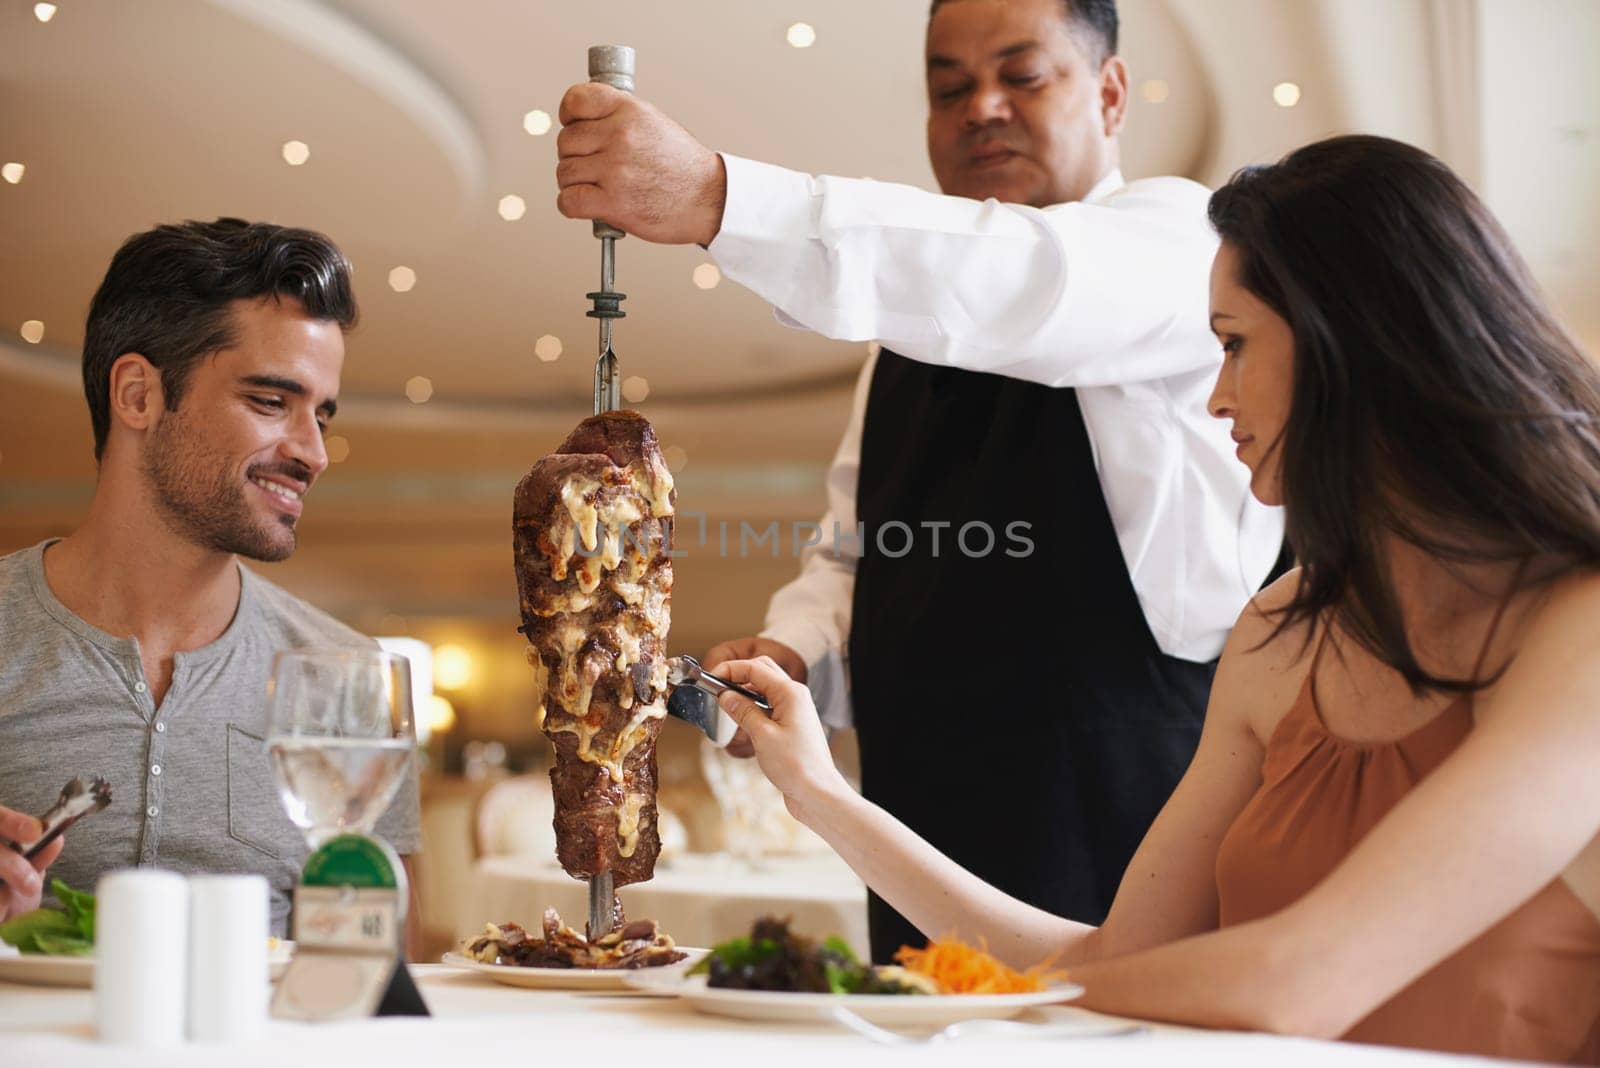 Couple, waiter and service for lunch in restaurant with meat, happiness and fine dining for anniversary or honeymoon. Man, woman and employee with steak on skewer, healthy meal and table in London.